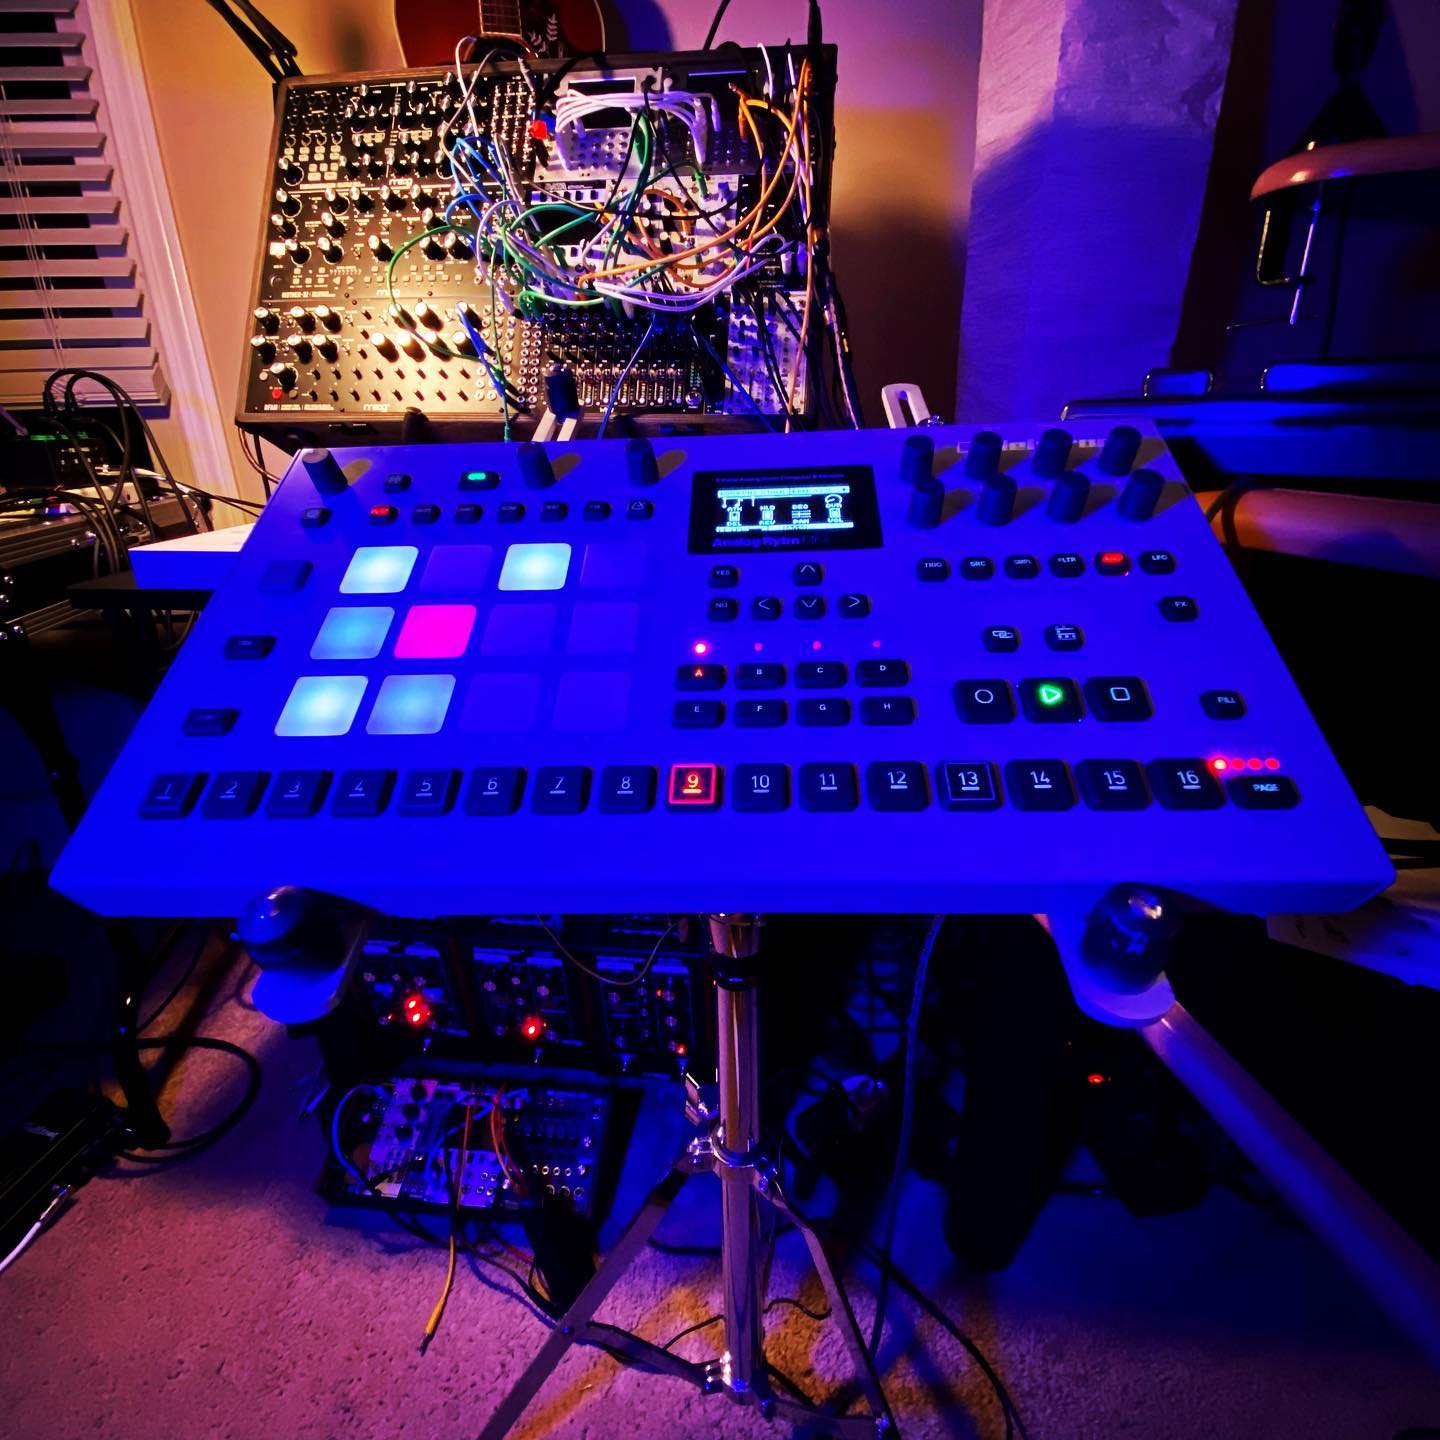 Just got my Elektron Analog Rytm back from repairs on the day they announced a new version at a new higher price. Yikes! Glad I got mine when I did, even though I love the new color. It’s an amazing sounding drum machine but it’s not my favorite workflow. It’ll never be my main machine but I’ll never get rid of it. Happy to have it back!